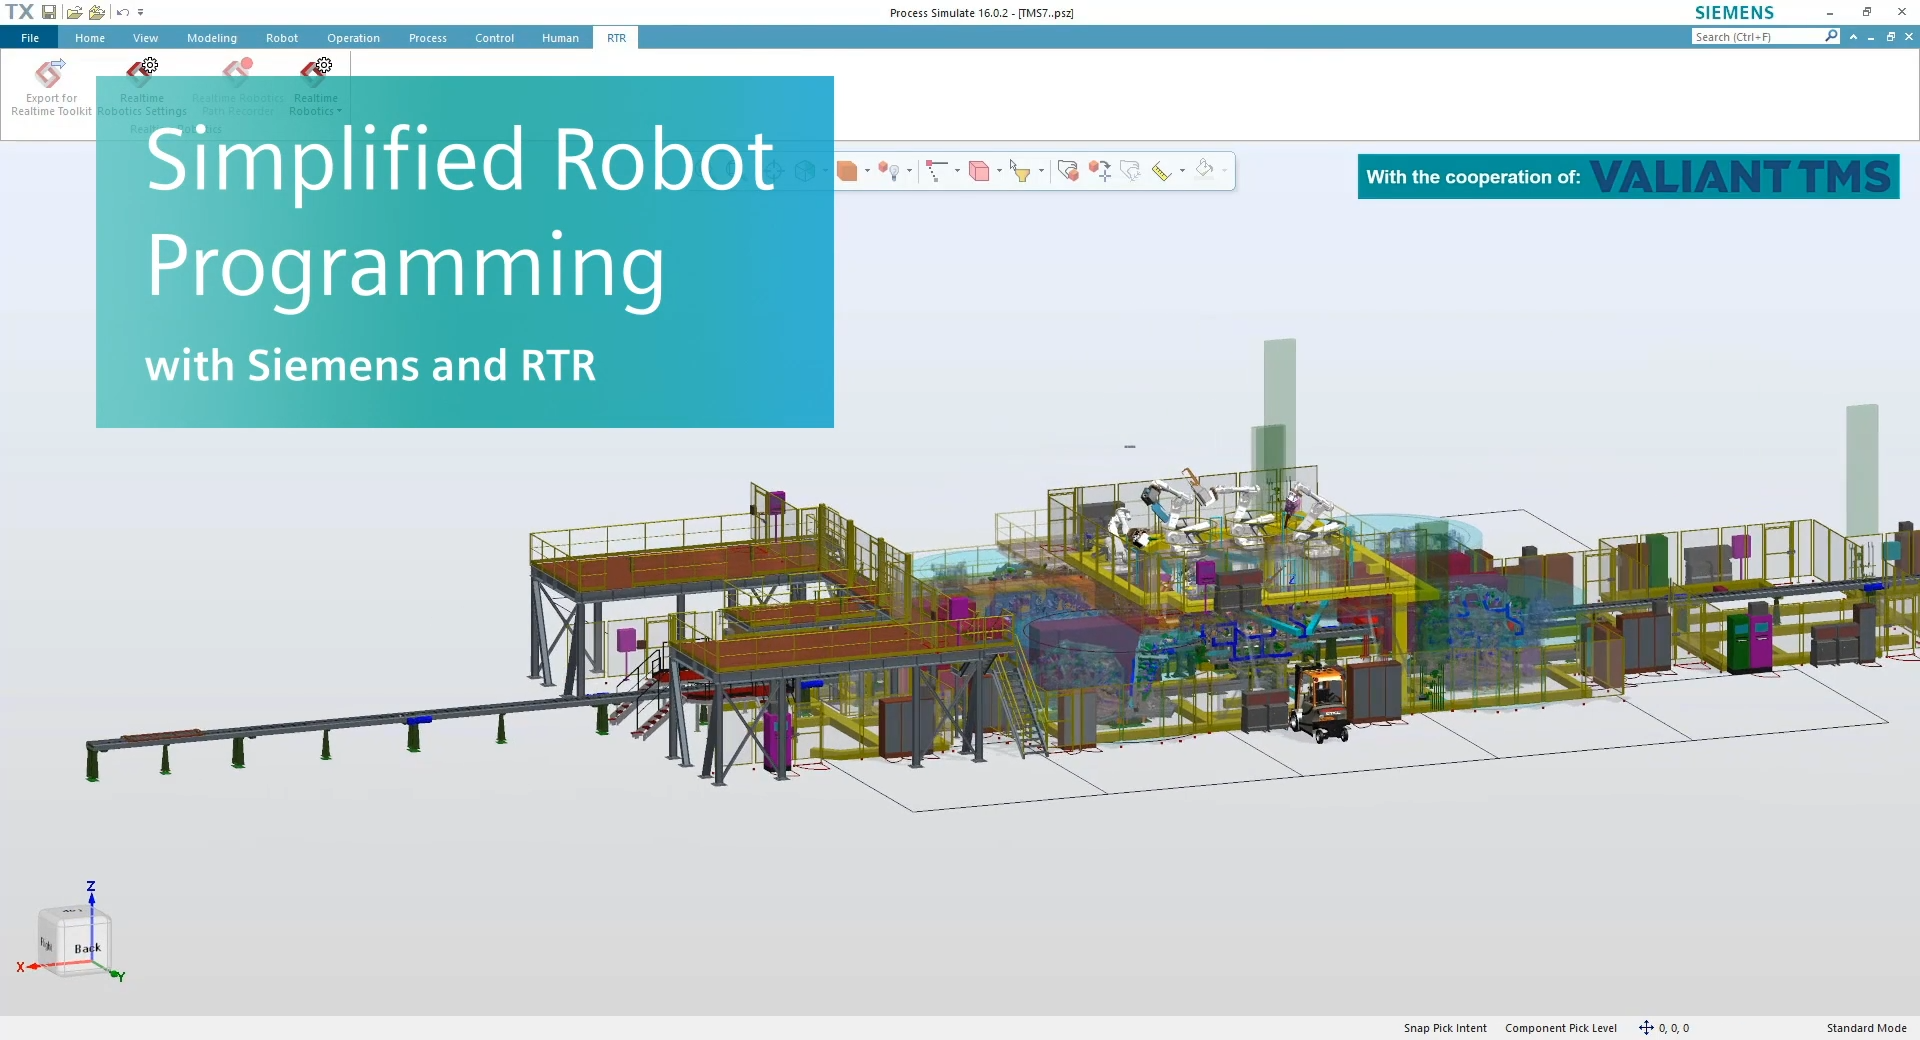 Valiant TMS simplifies robot programming with Siemens and RTR